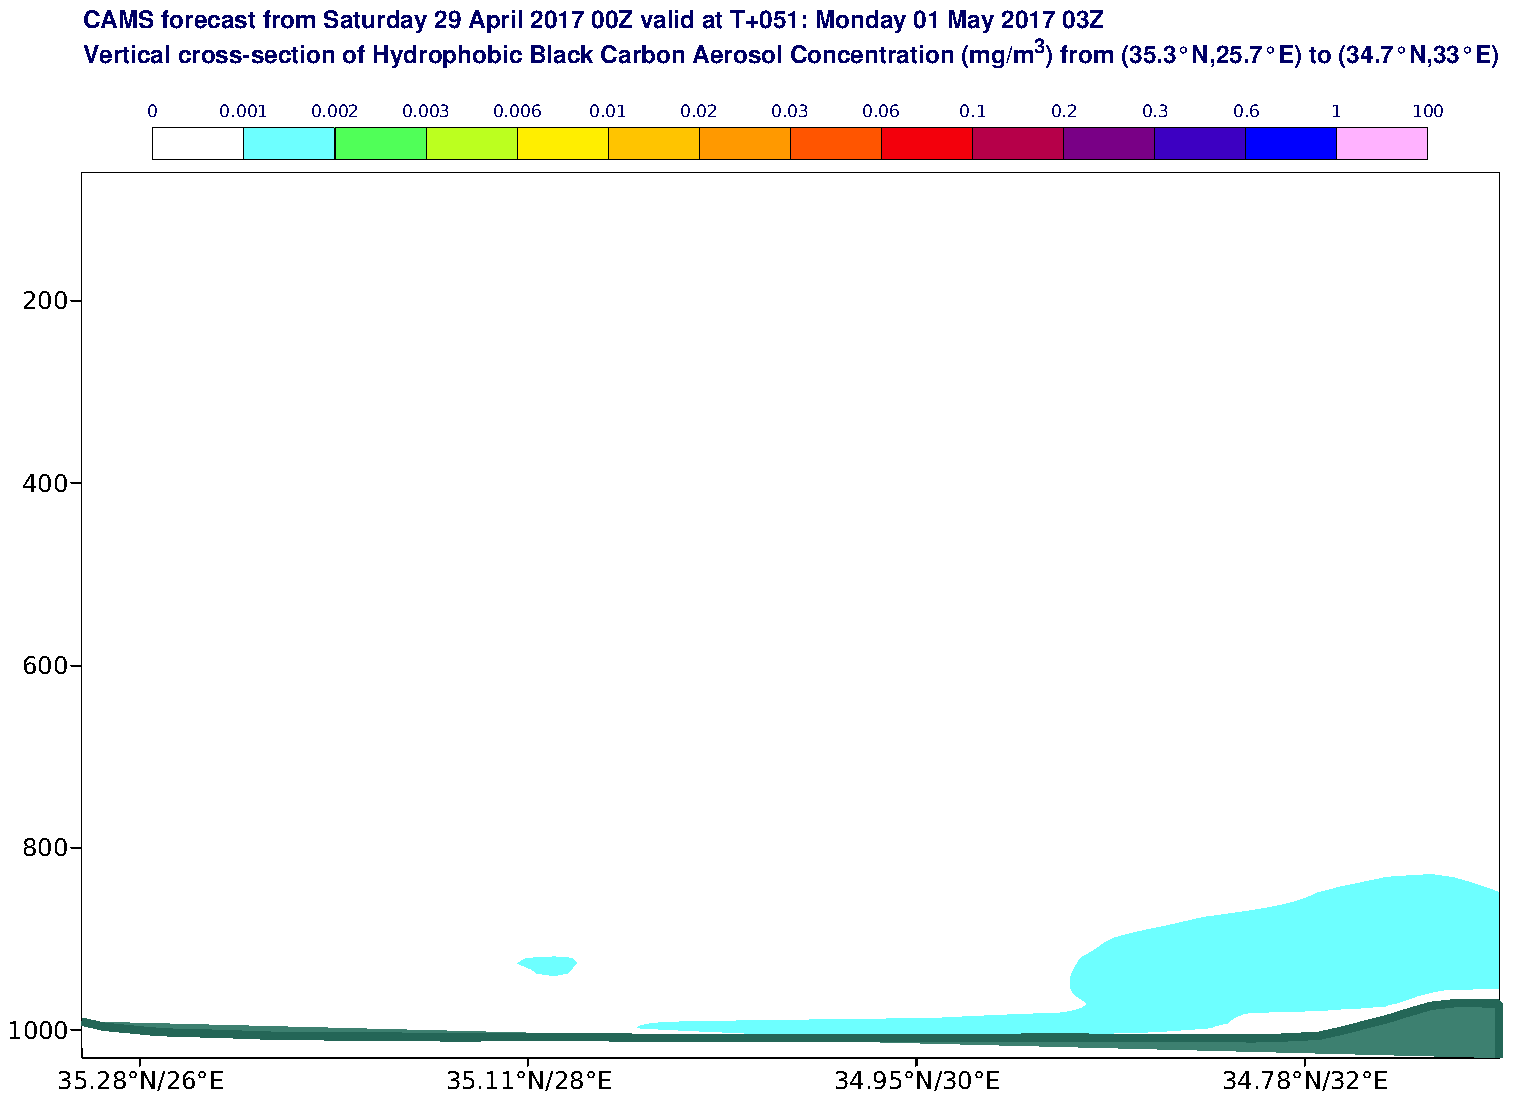 Vertical cross-section of Hydrophobic Black Carbon Aerosol Concentration (mg/m3) valid at T51 - 2017-05-01 03:00